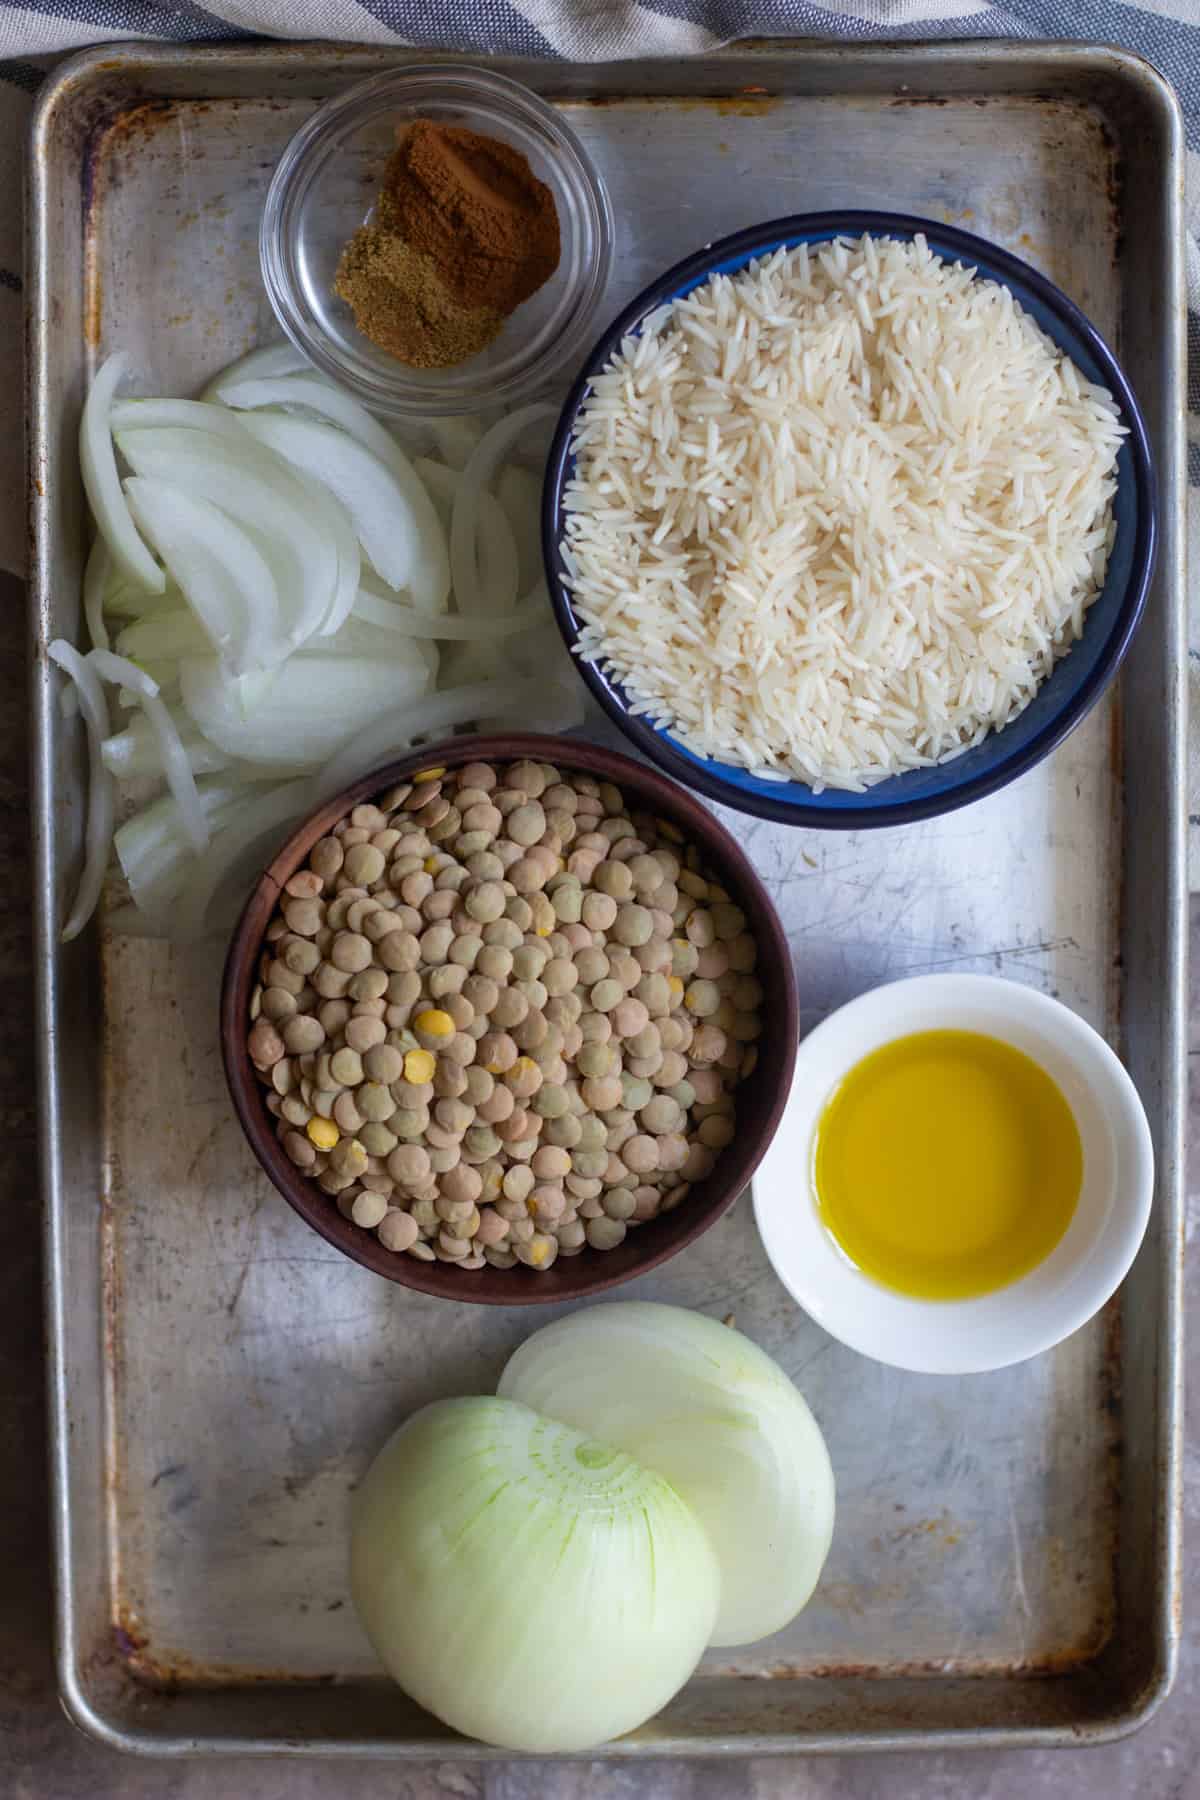 Ingredients to make Lebanese rice and lentils are rice, lentils, onion, olive oil, cinnamon and cumin. 